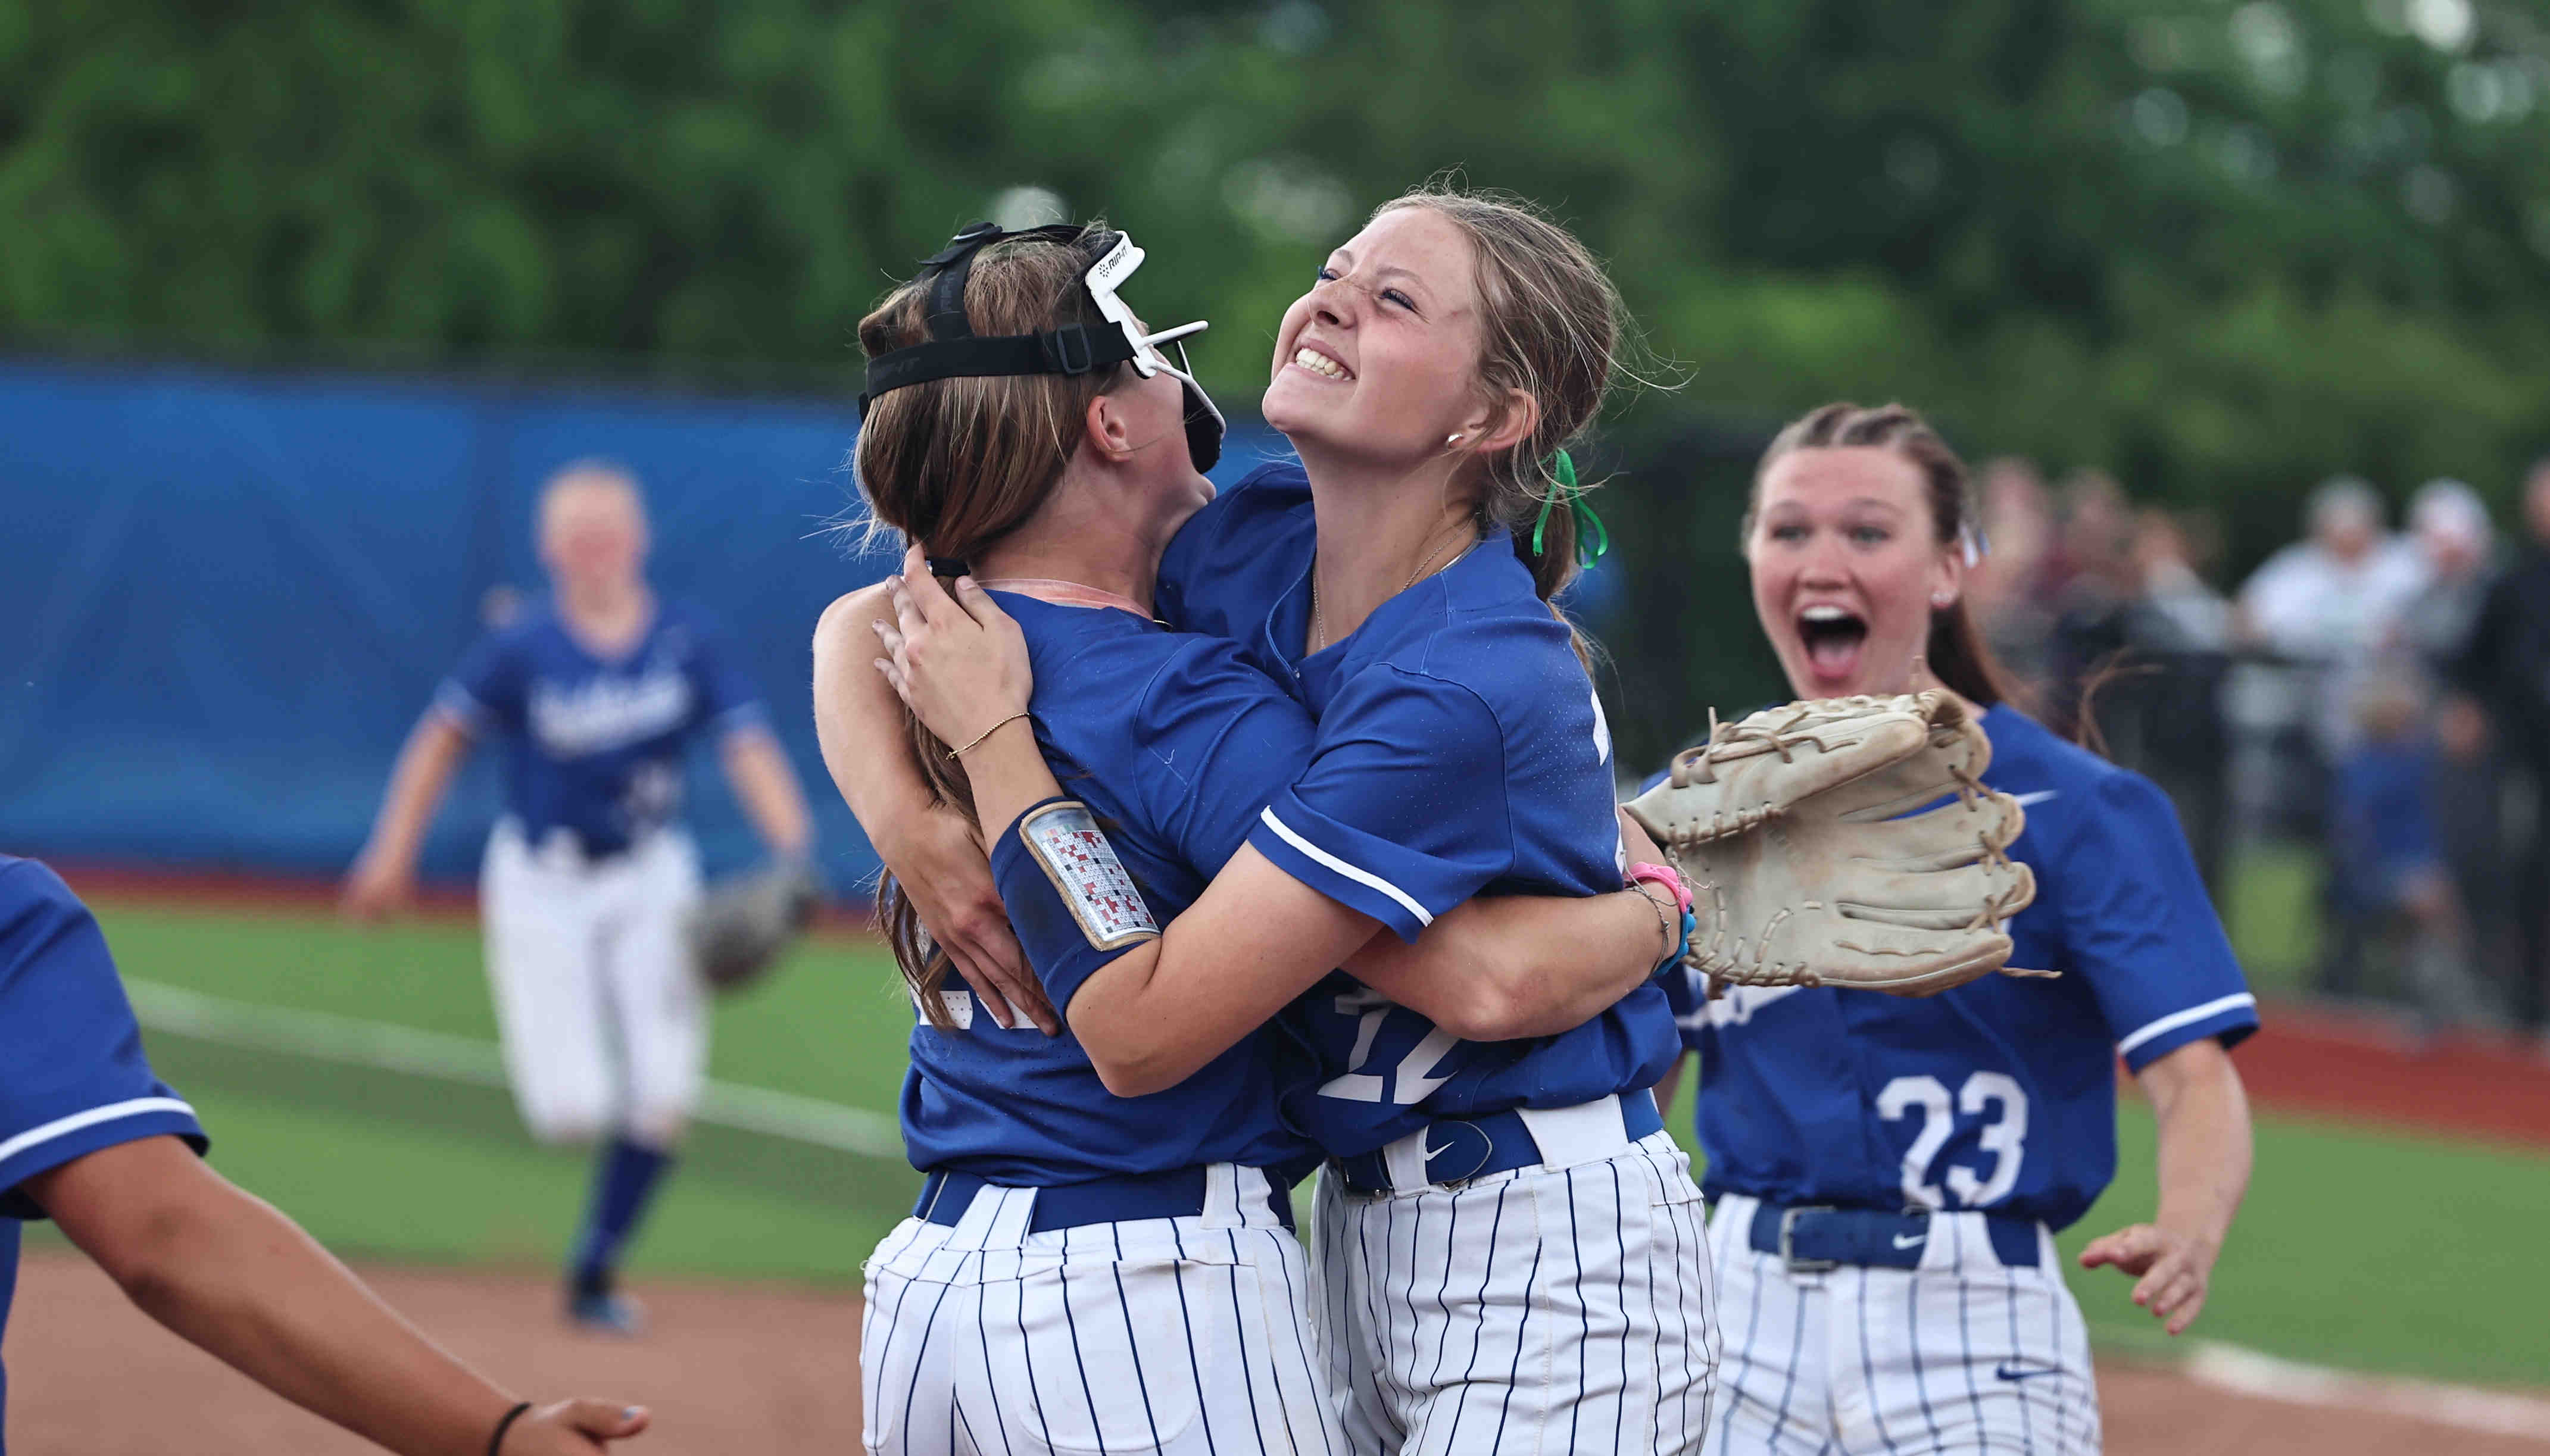 'It really is incredible.' Highlands softball completes Ninth Region 3-peat